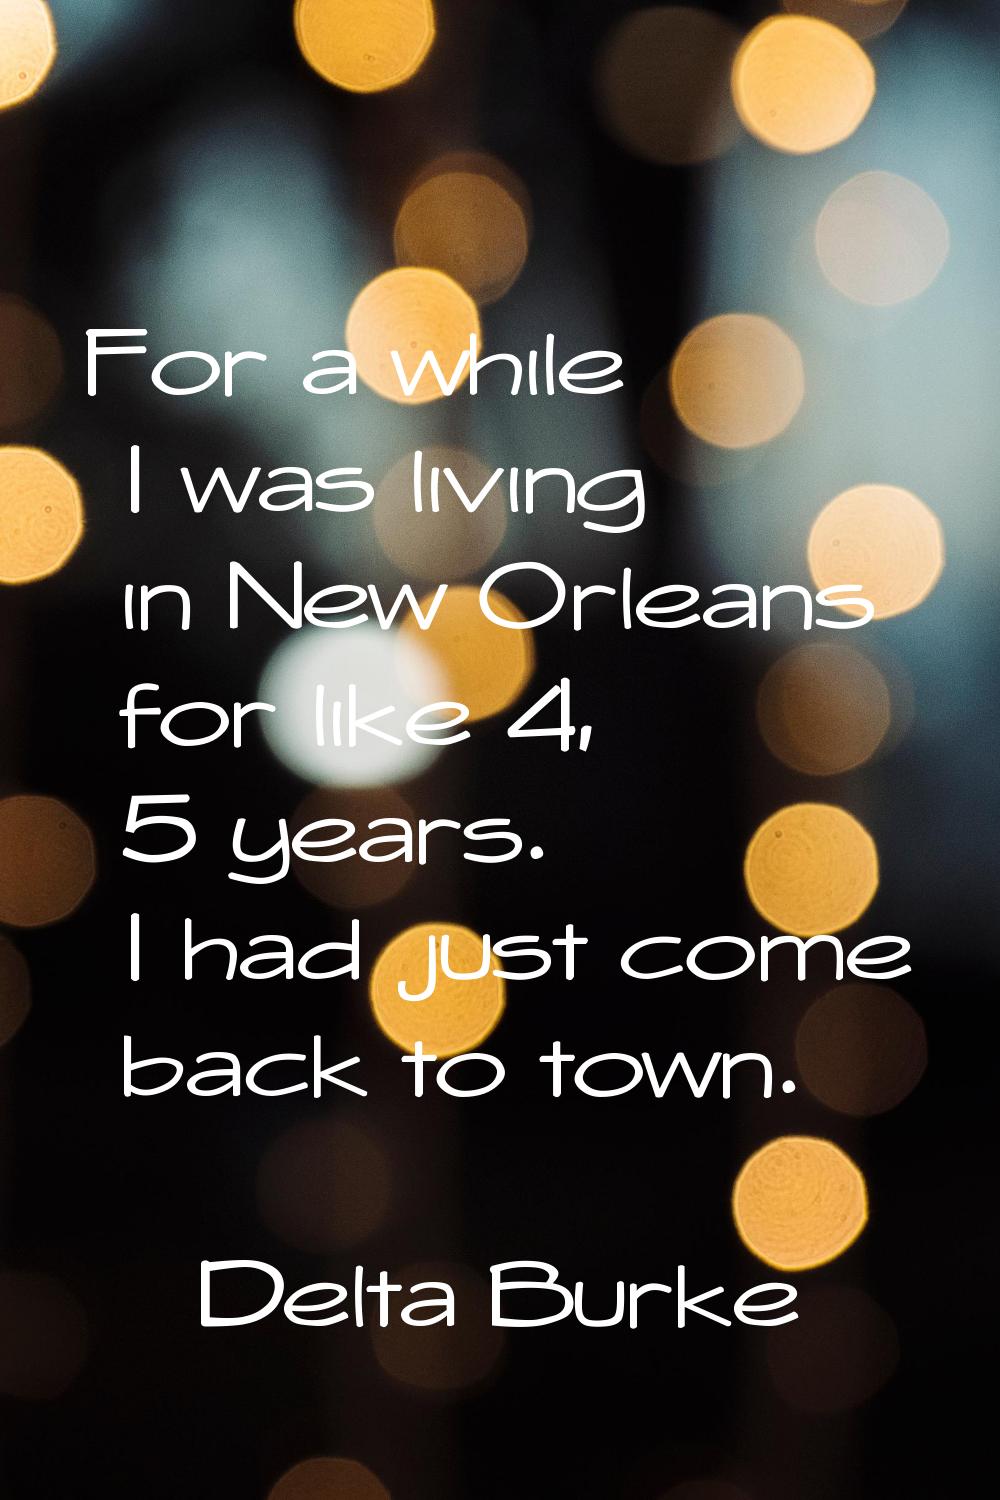 For a while I was living in New Orleans for like 4, 5 years. I had just come back to town.